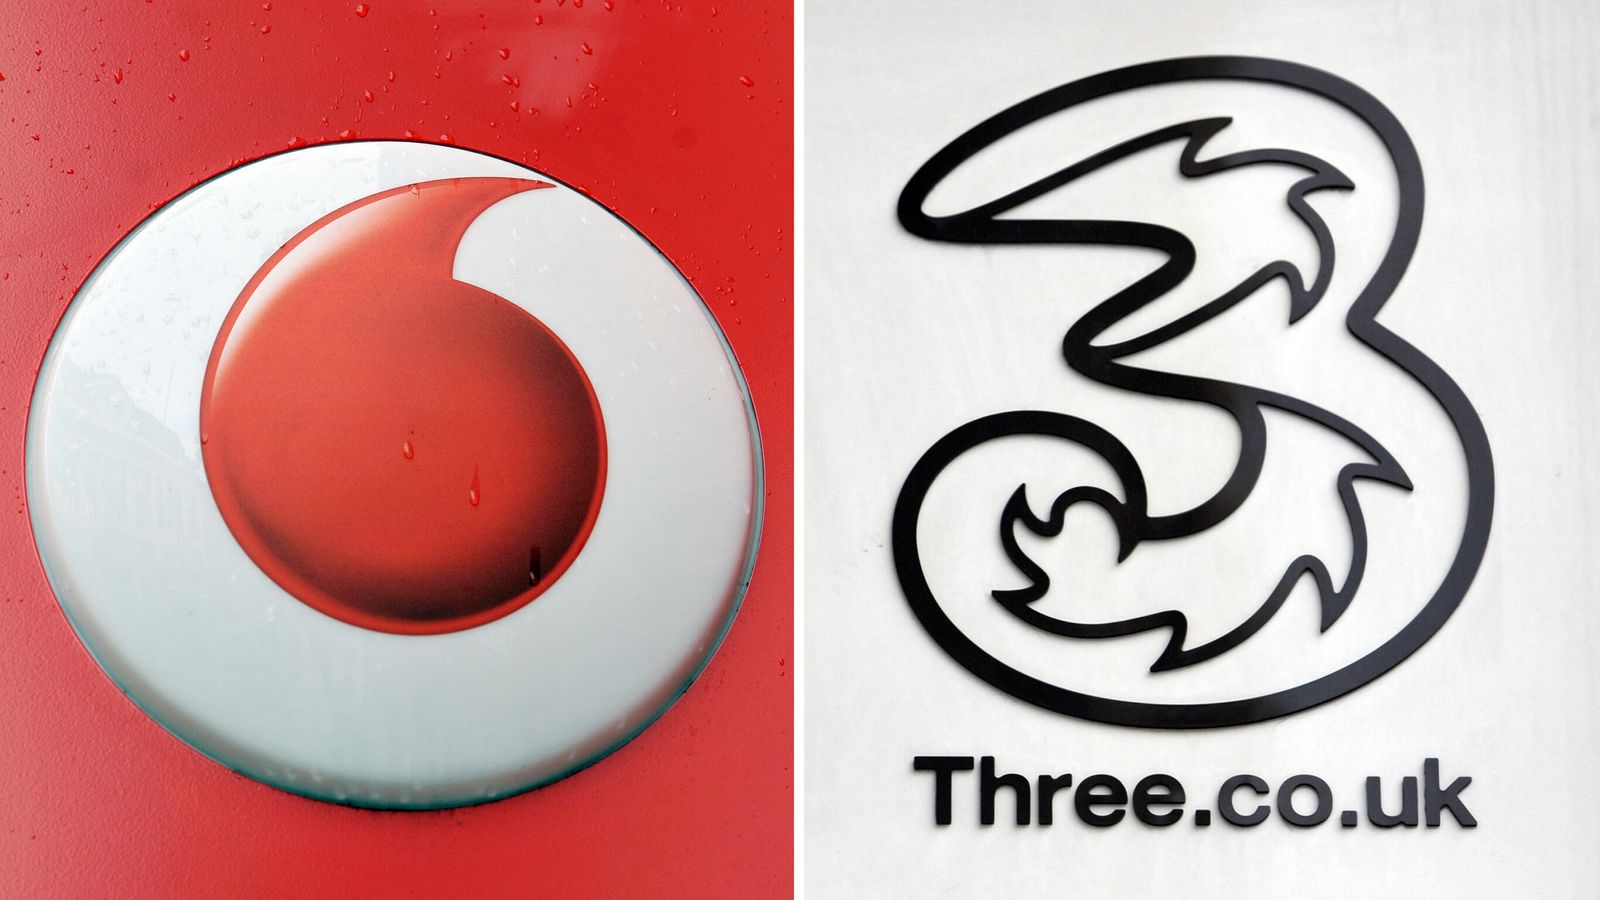 Vodafone and Three agree UK merger to create biggest mobile player worth £15bn | Business News